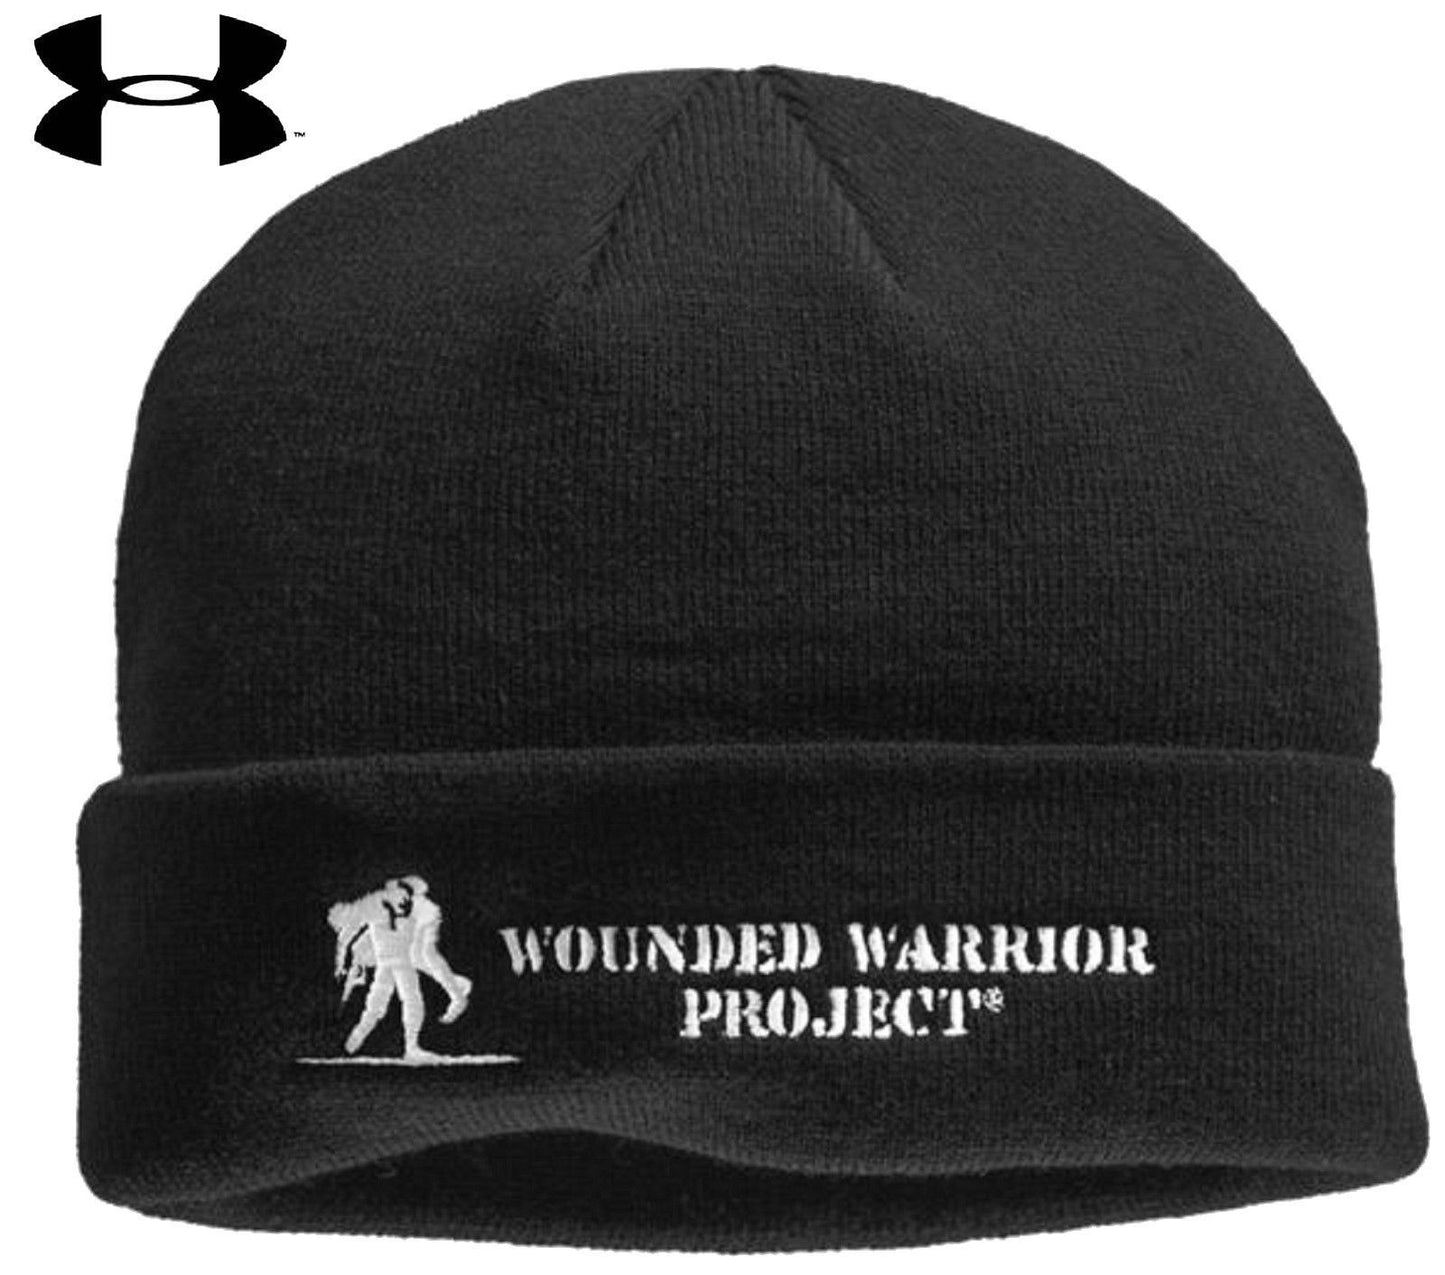 Black Under Armour Wounded Warrior Project Stealth Beanie Winter Hat WWP Ski Cap